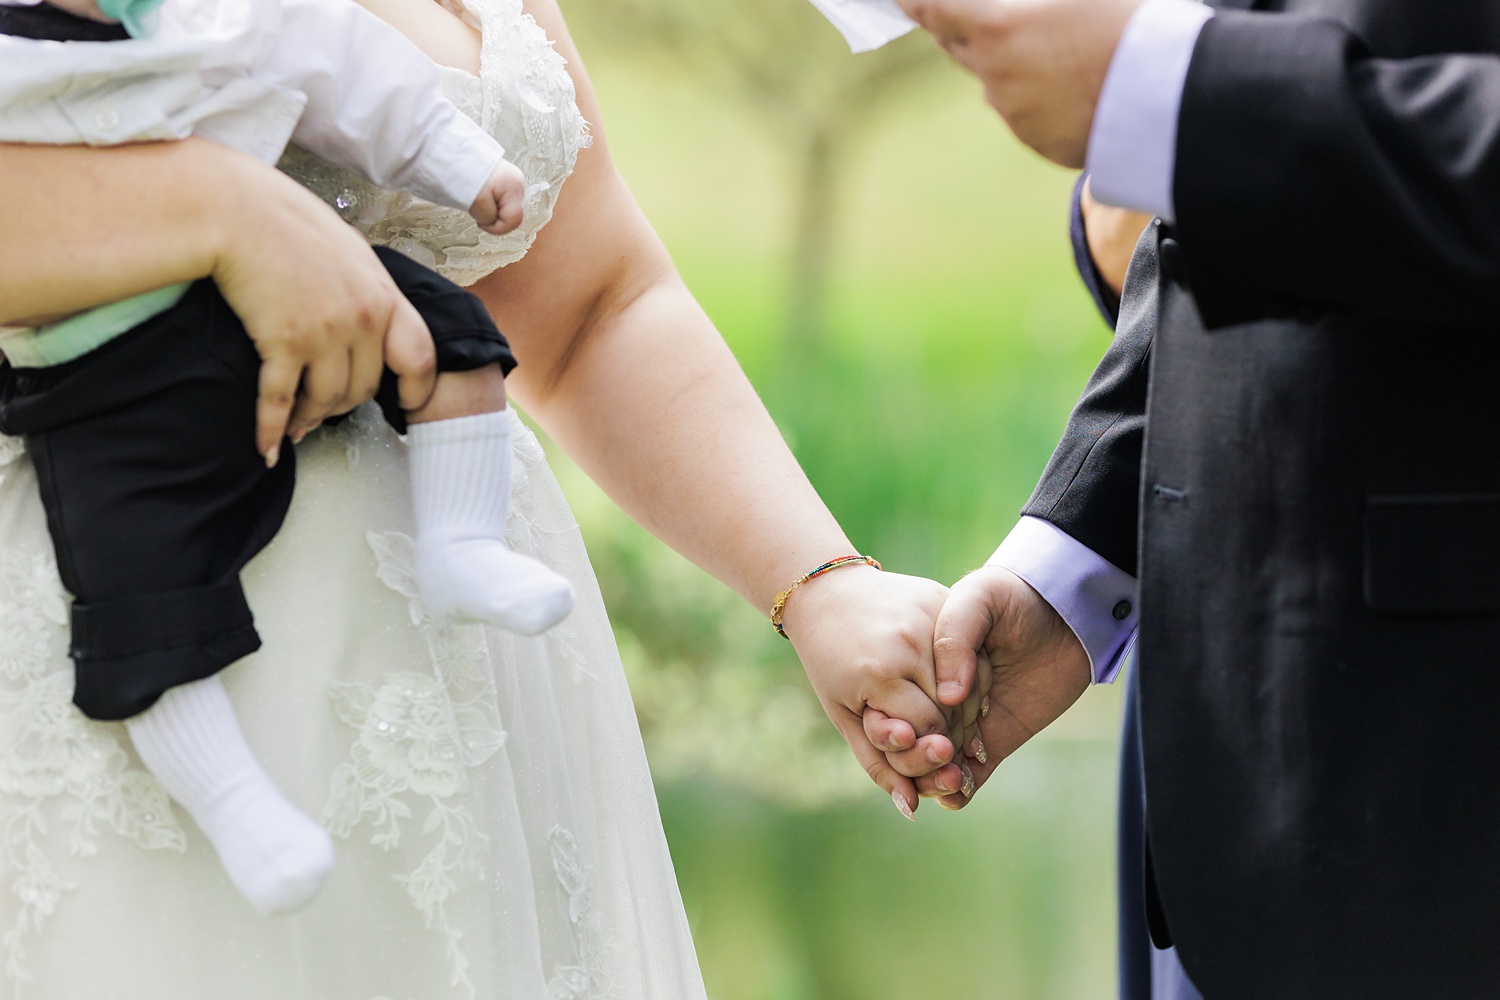 The couple hold hands and their son during the wedding ceremony